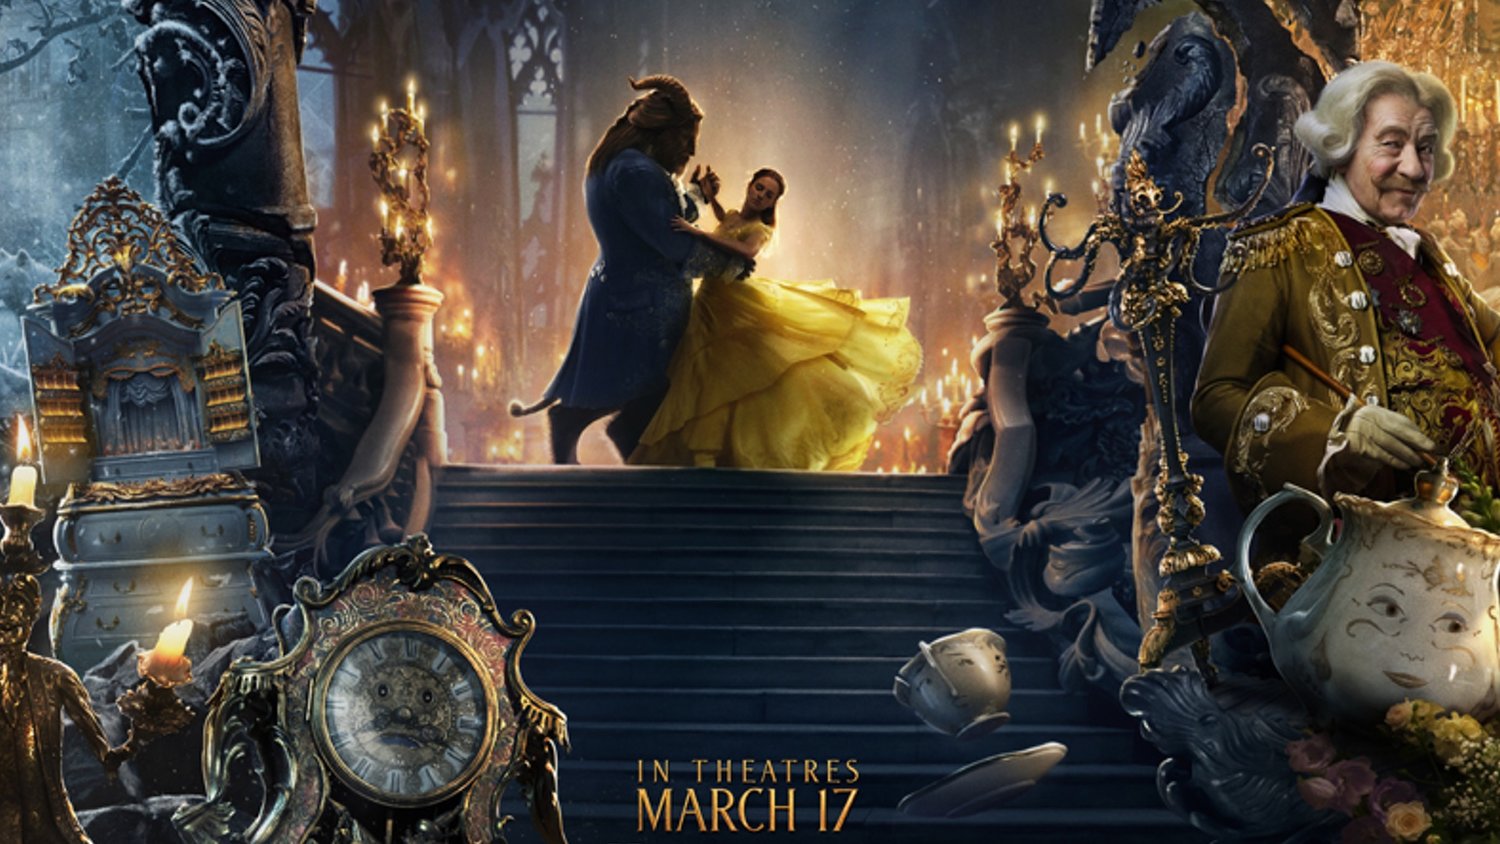 Beautifully Cool New Banner for Disney's BEAUTY AND THE BEAST